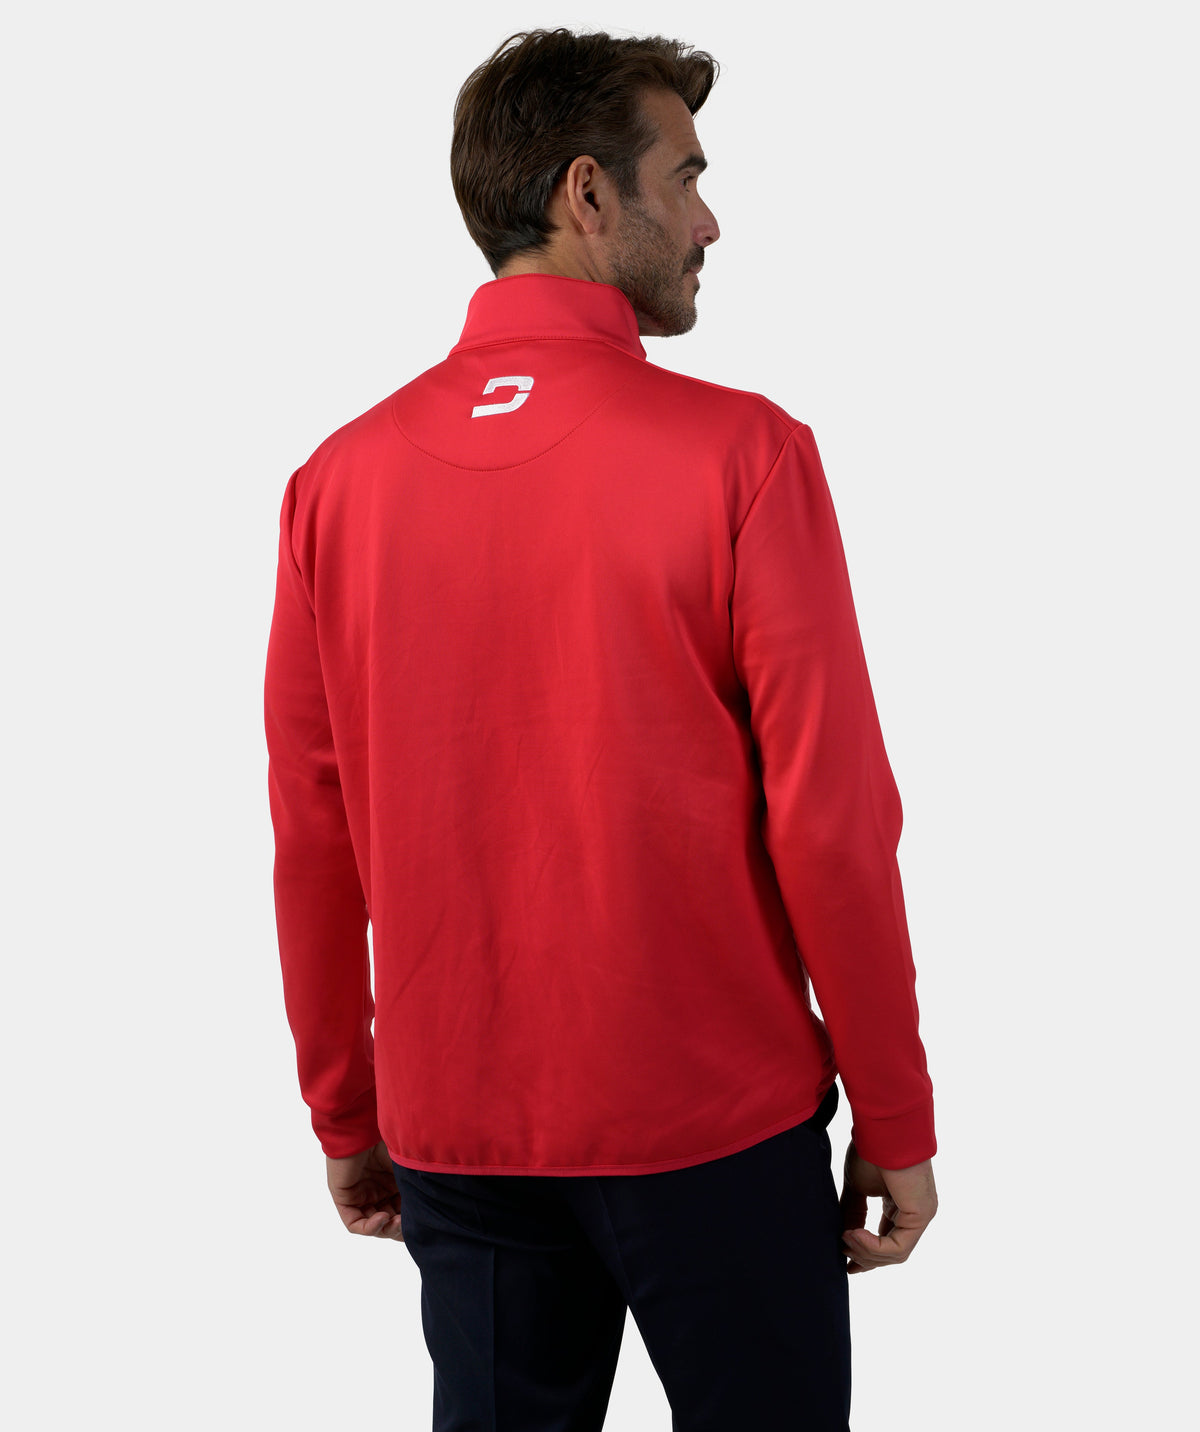 CLIMA JACKET 3.0 RED